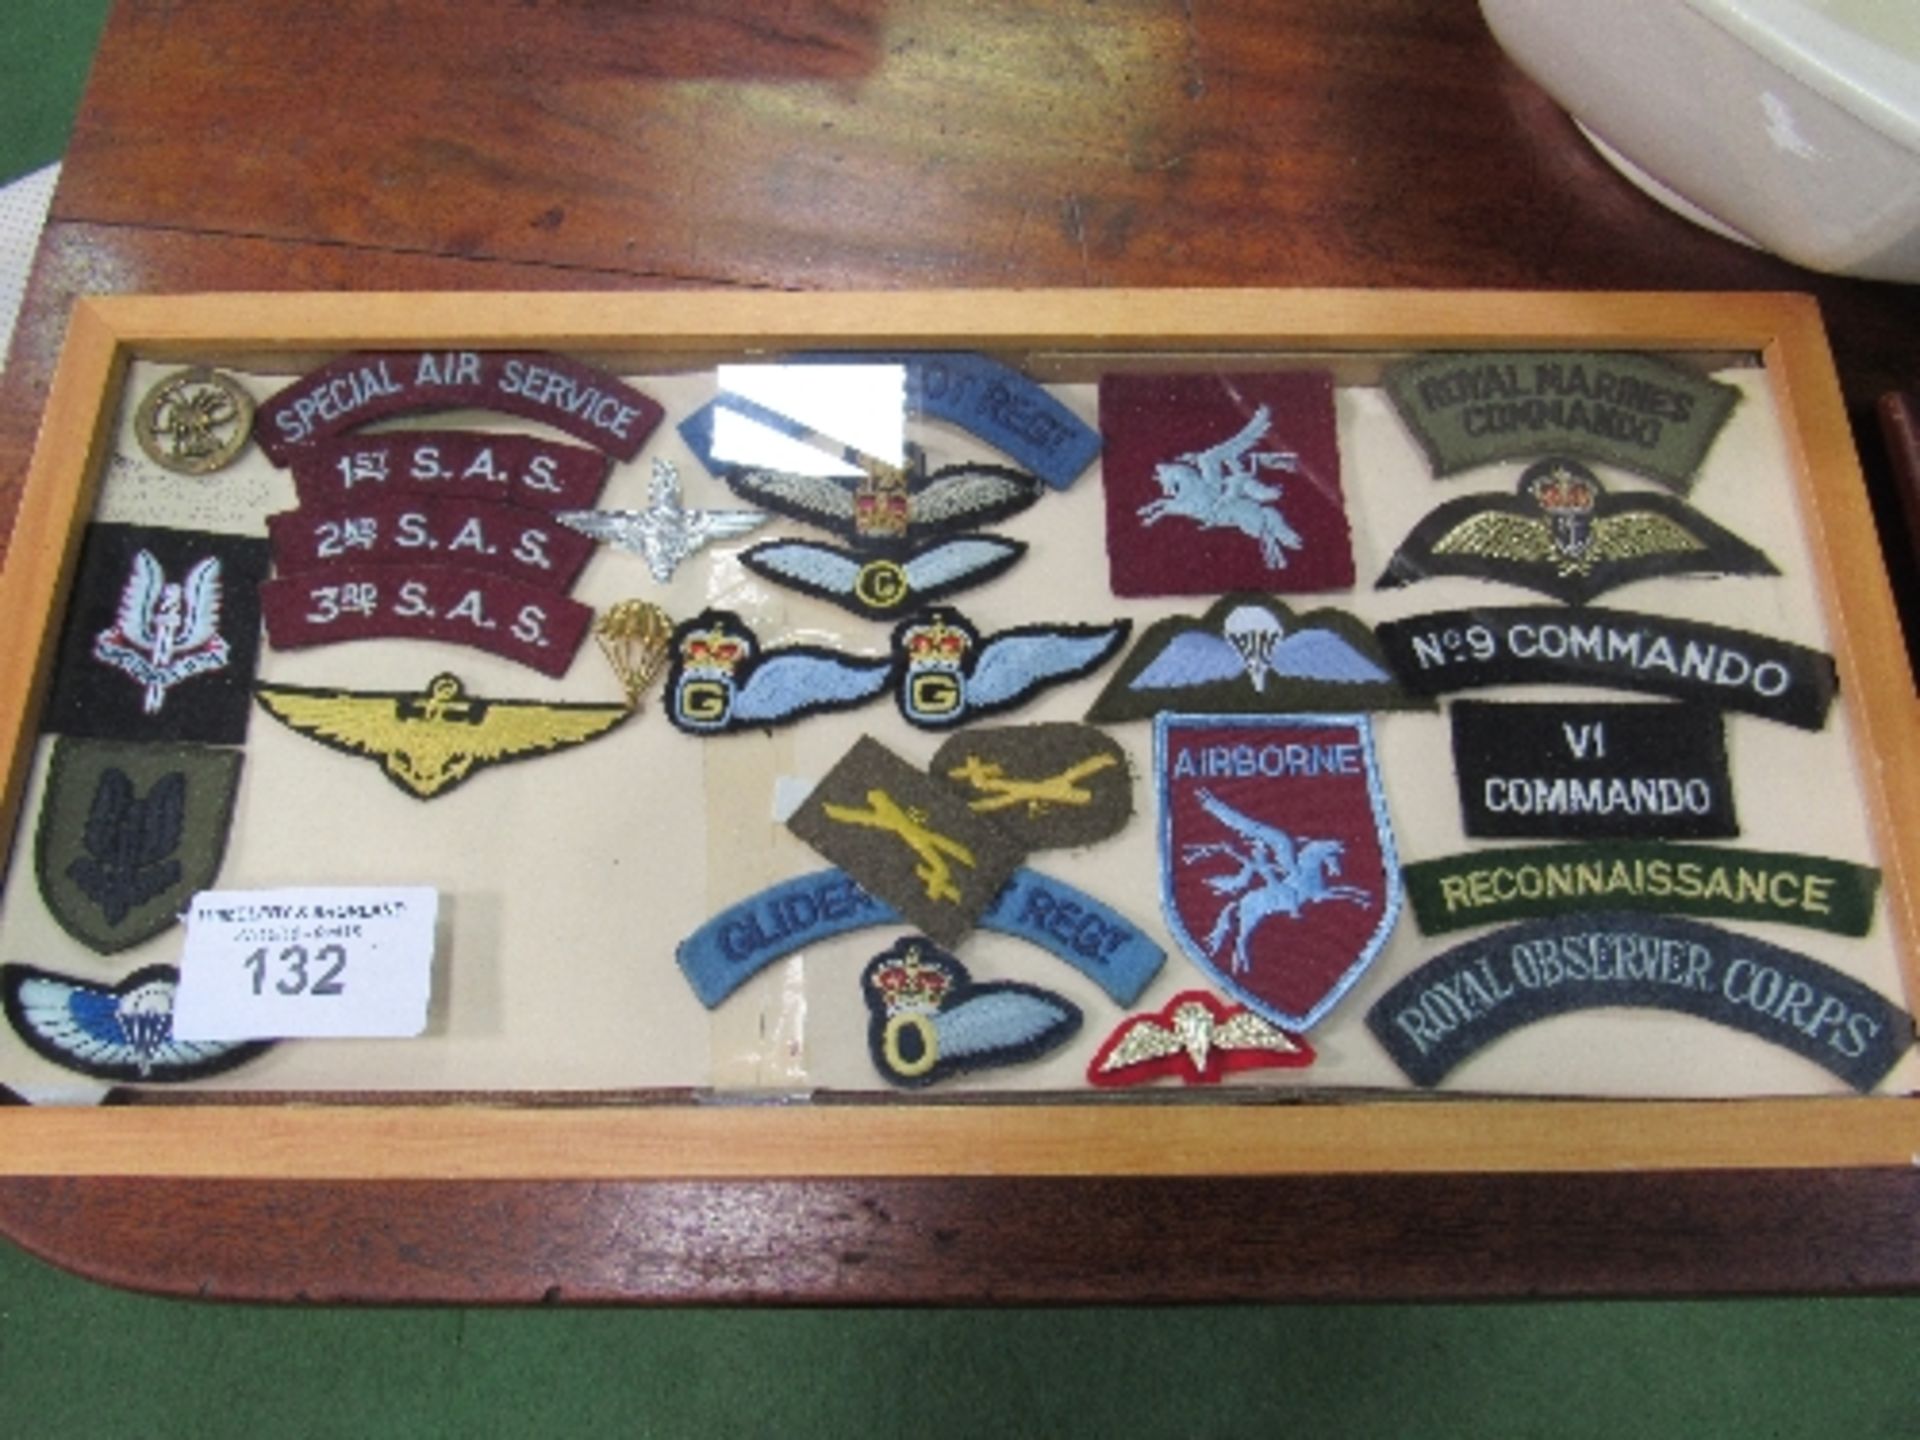 2 framed collections of military badges in fabric. Price guide £10-20.